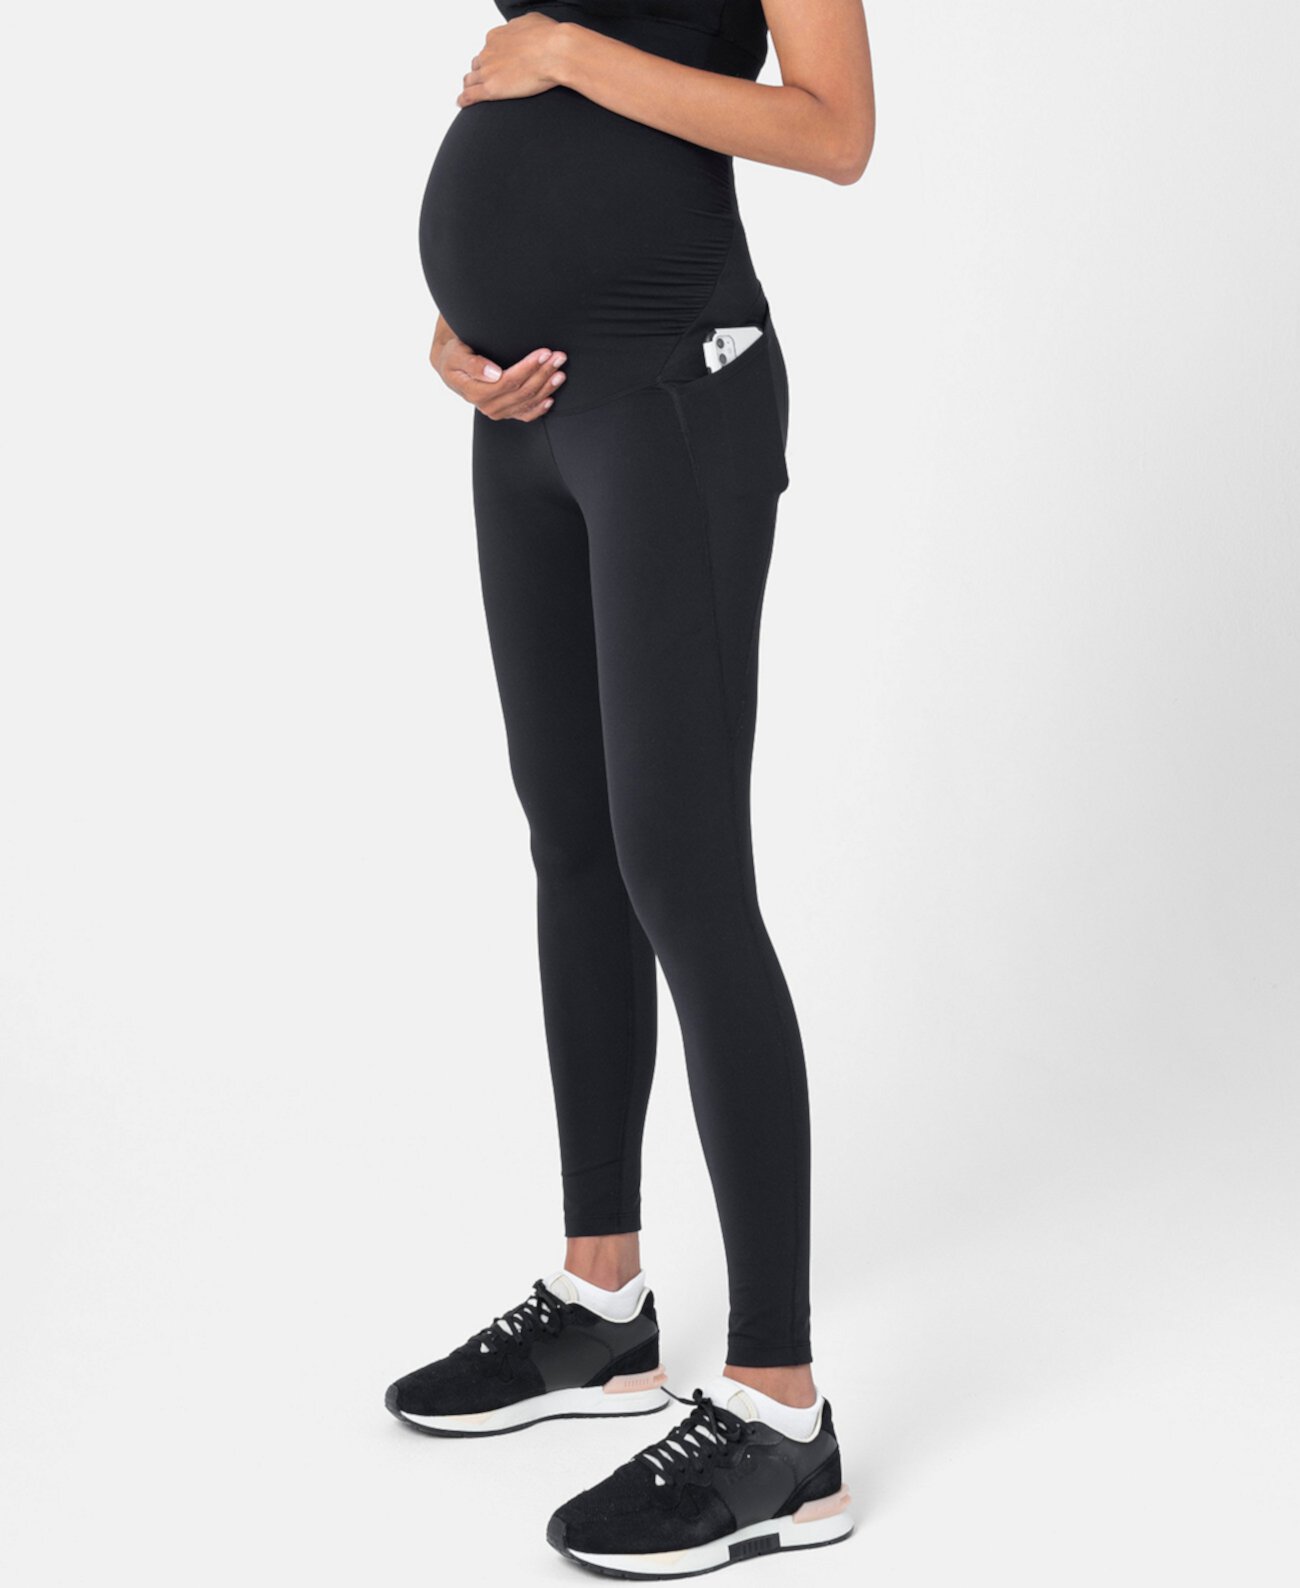 Women's Active Support Soft-Touch Maternity Leggings Seraphine